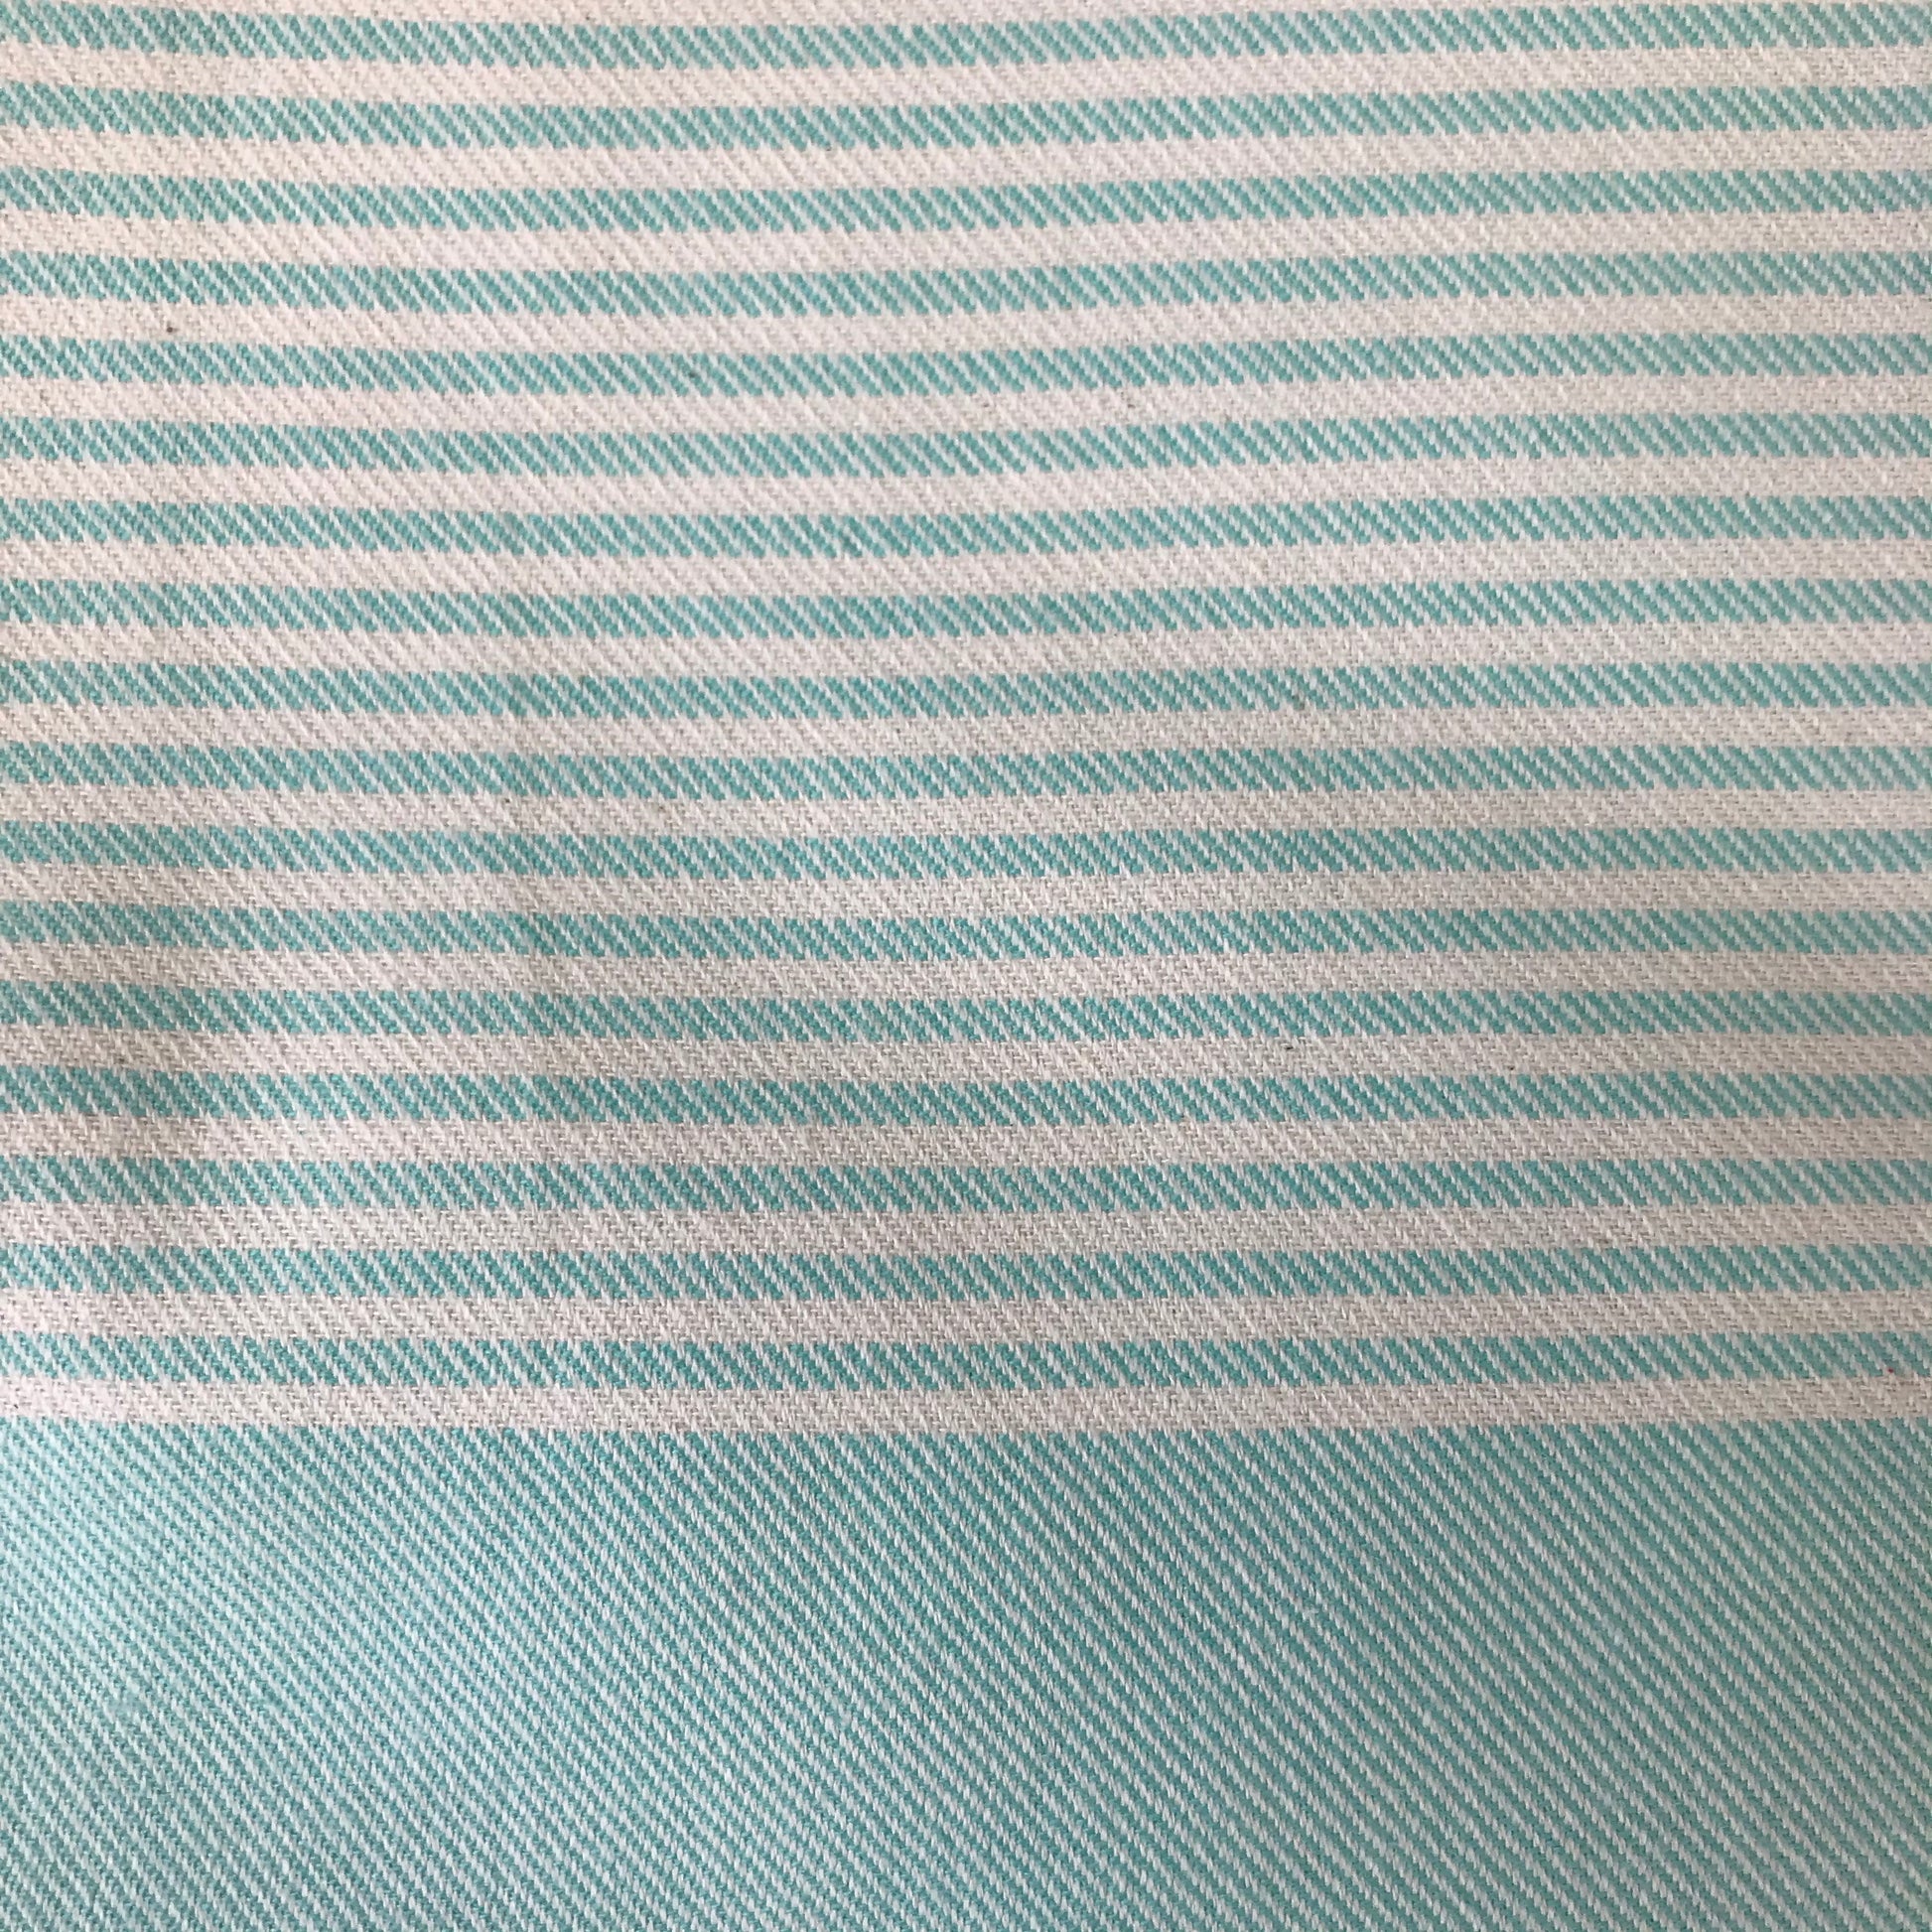 Eagle Bay ethically made turkish towel with pockets, coastal chic is aqua and white stripes